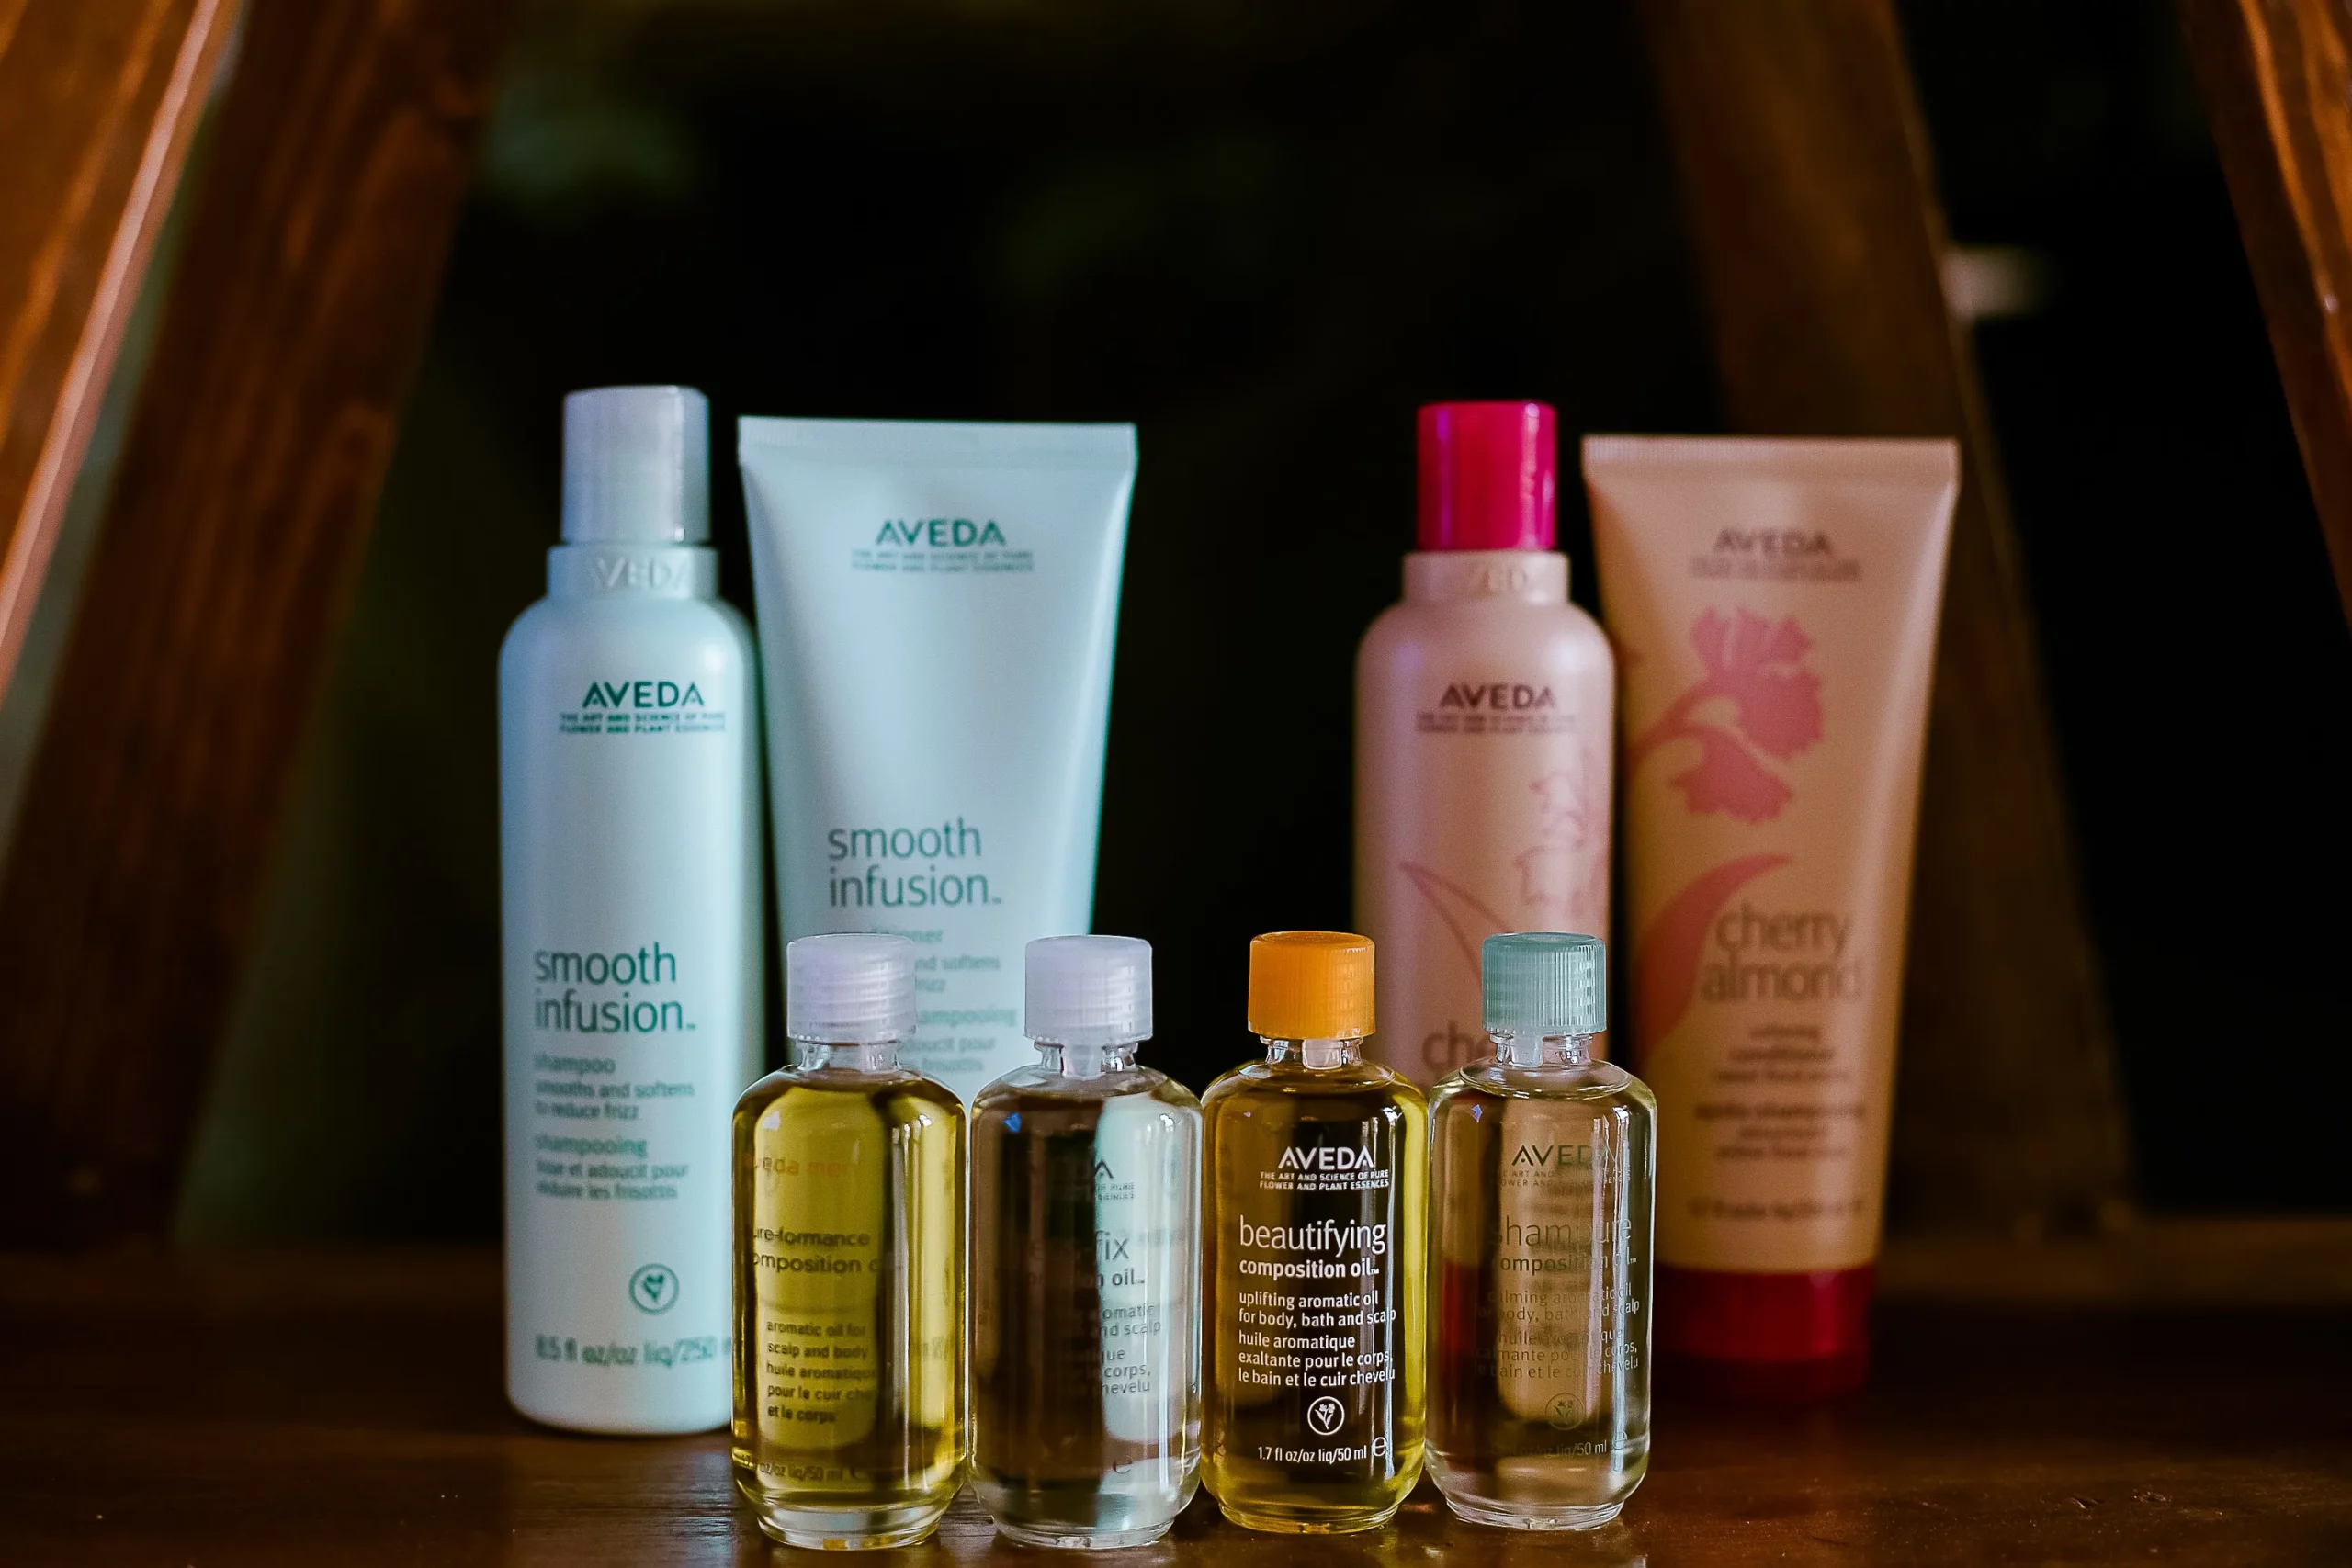 Aveda’s Beauty Alchemy: Crafting Perfection from Earth’s Bounty